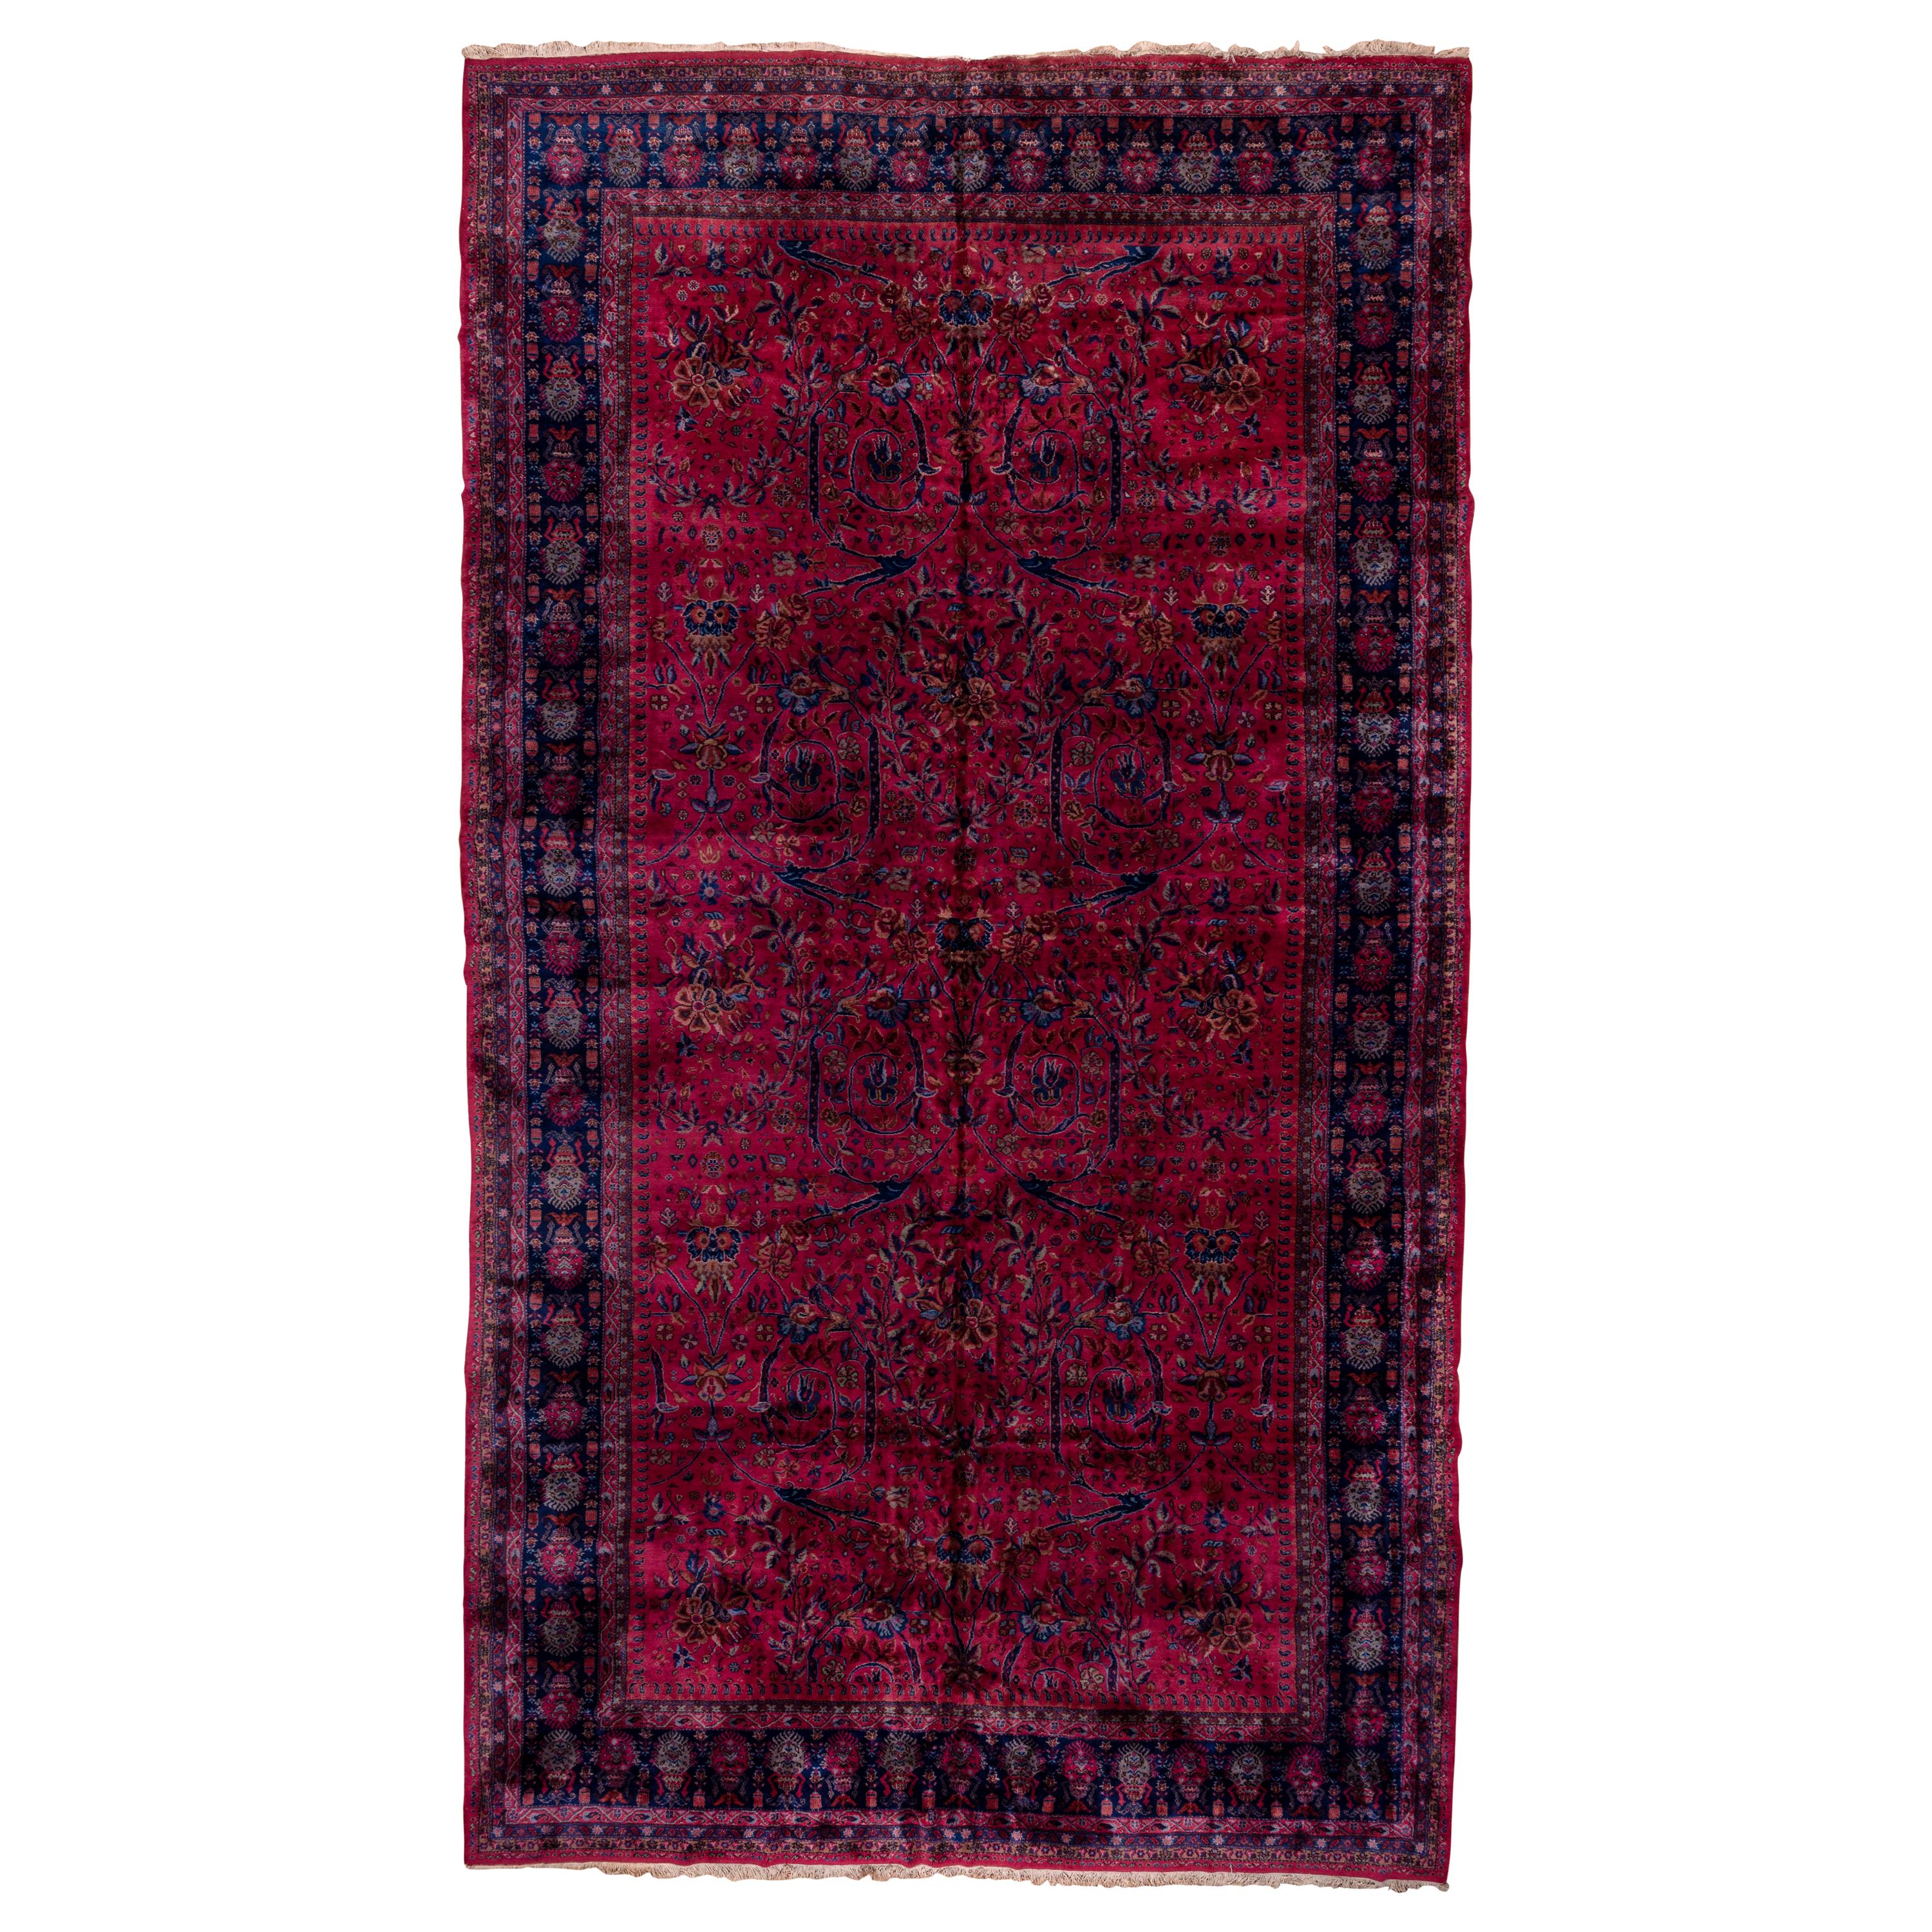 Turkish Sparta Mansion Carpet, Berry Colored Field, American Sarouk Inspired